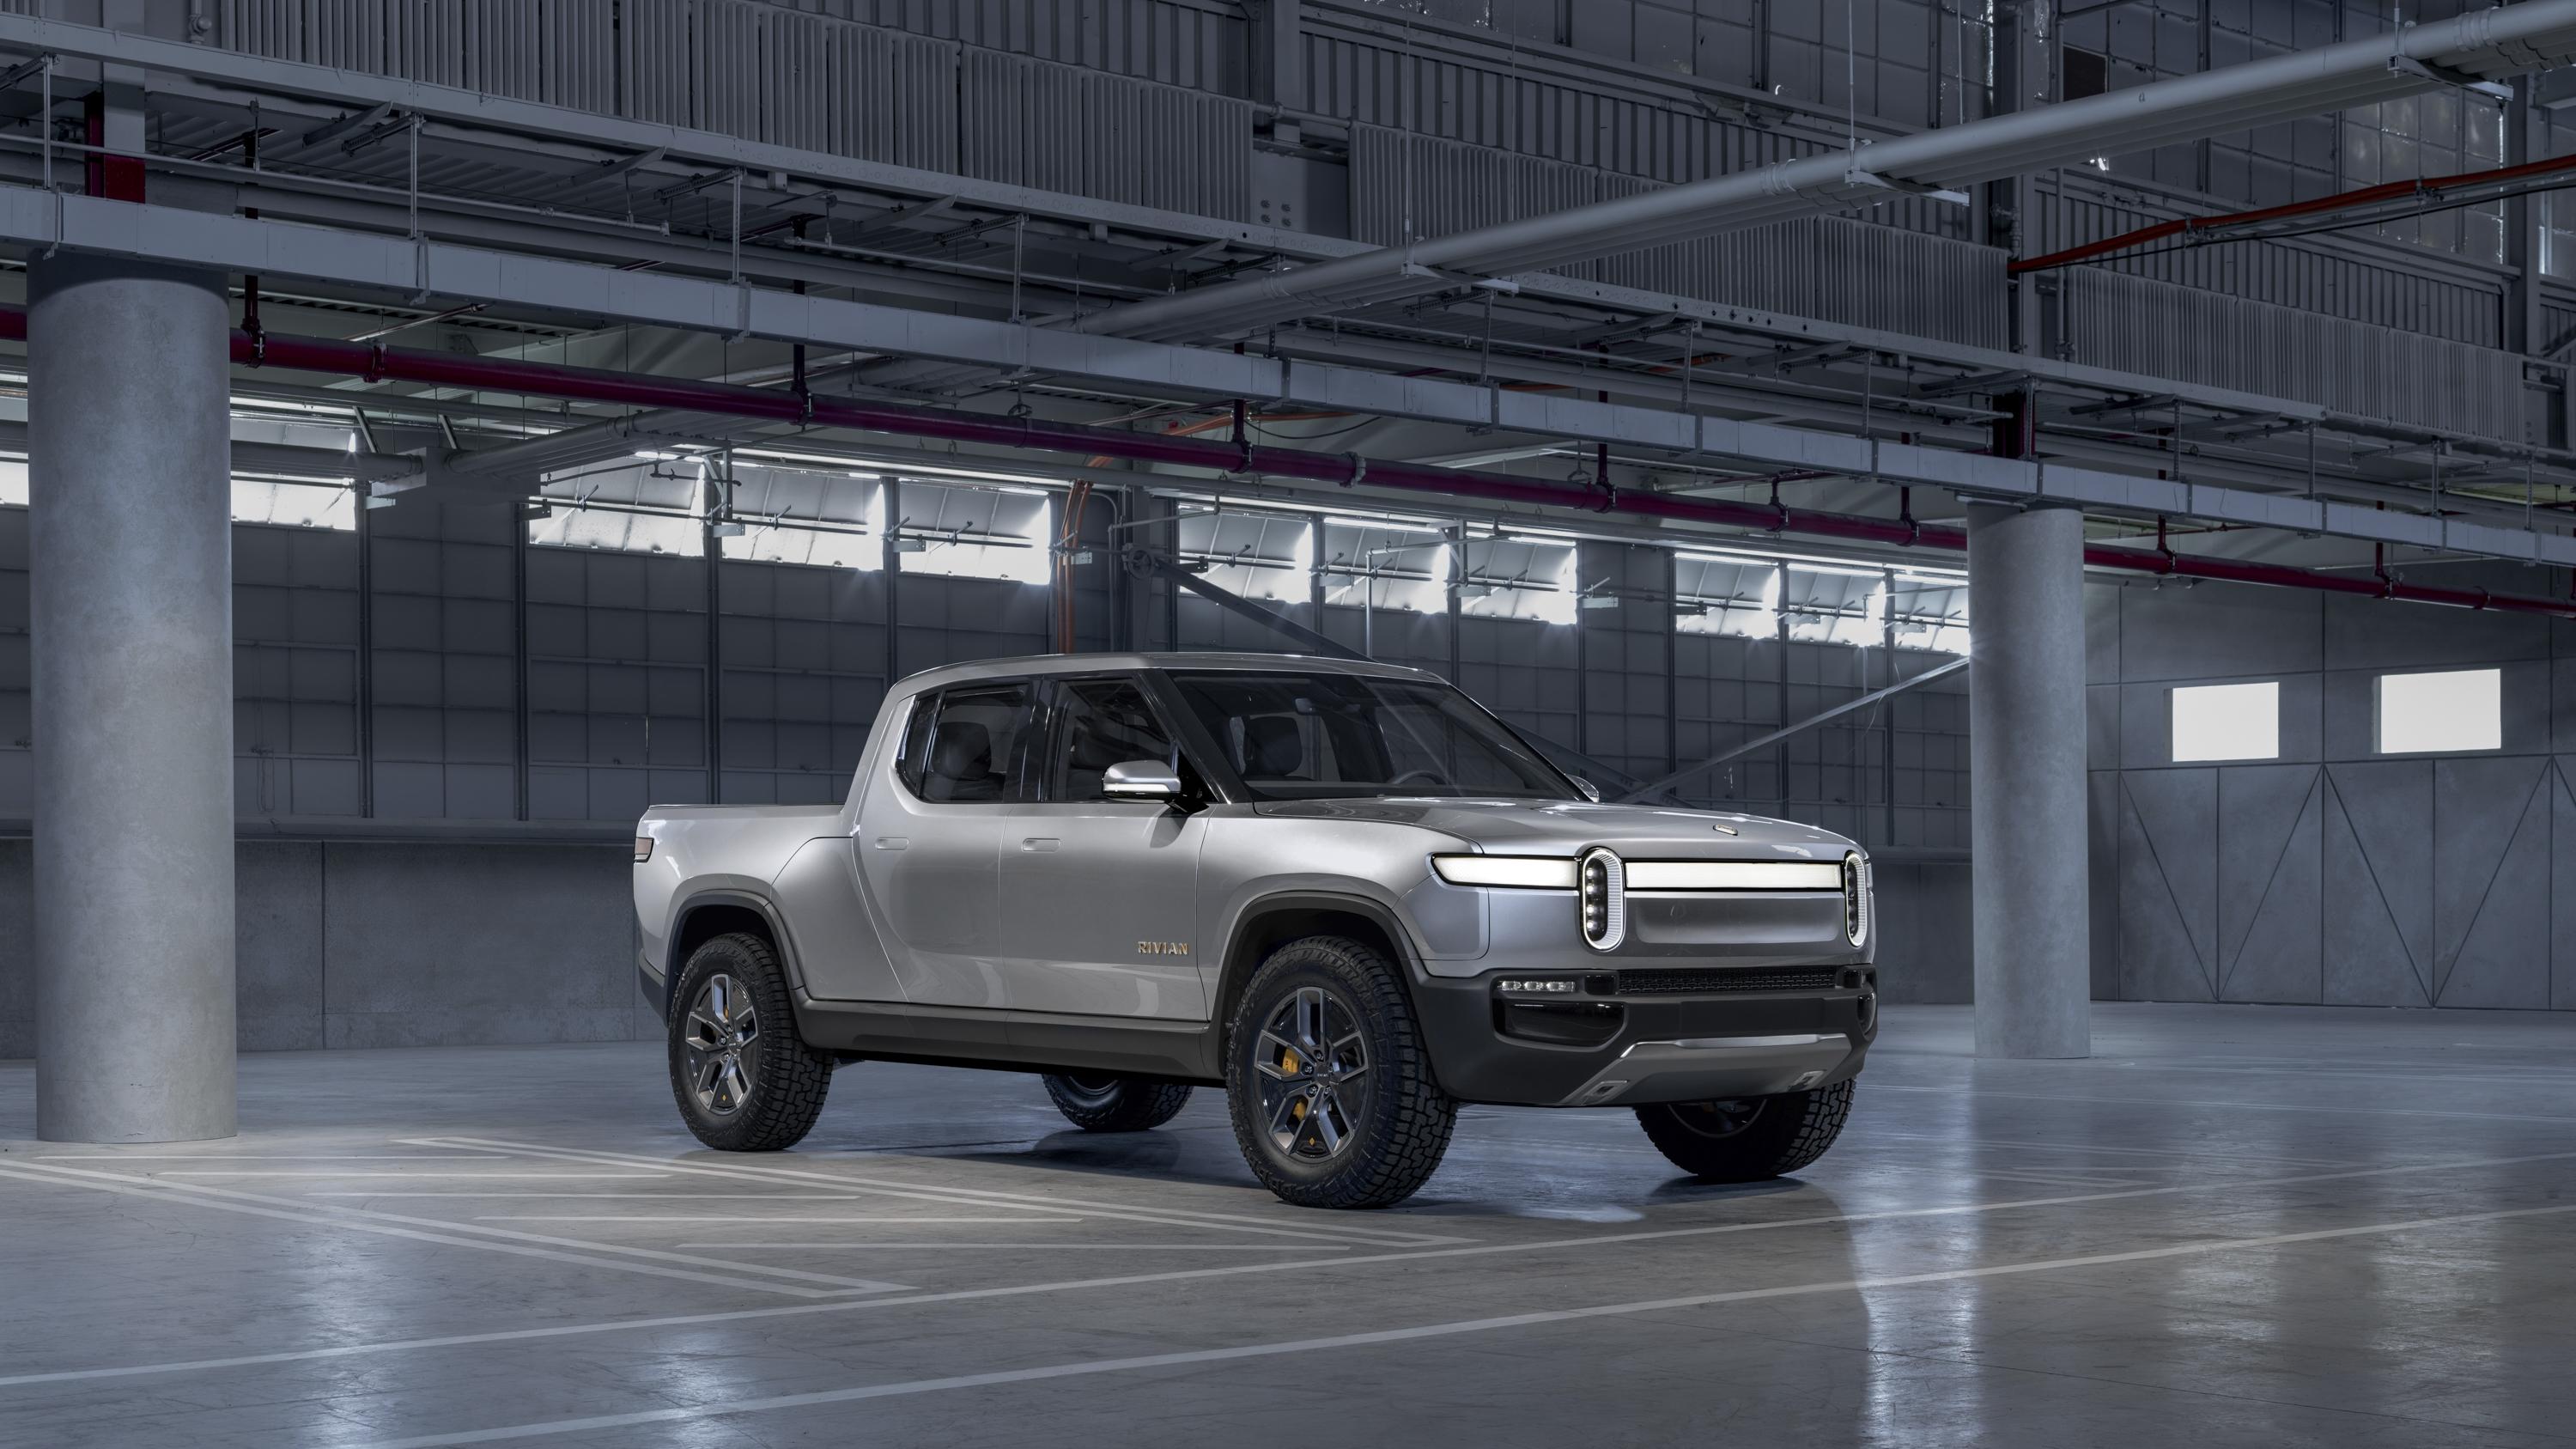 The 2020 Rivian R1T Electric Truck Middle Fingers Tesla With